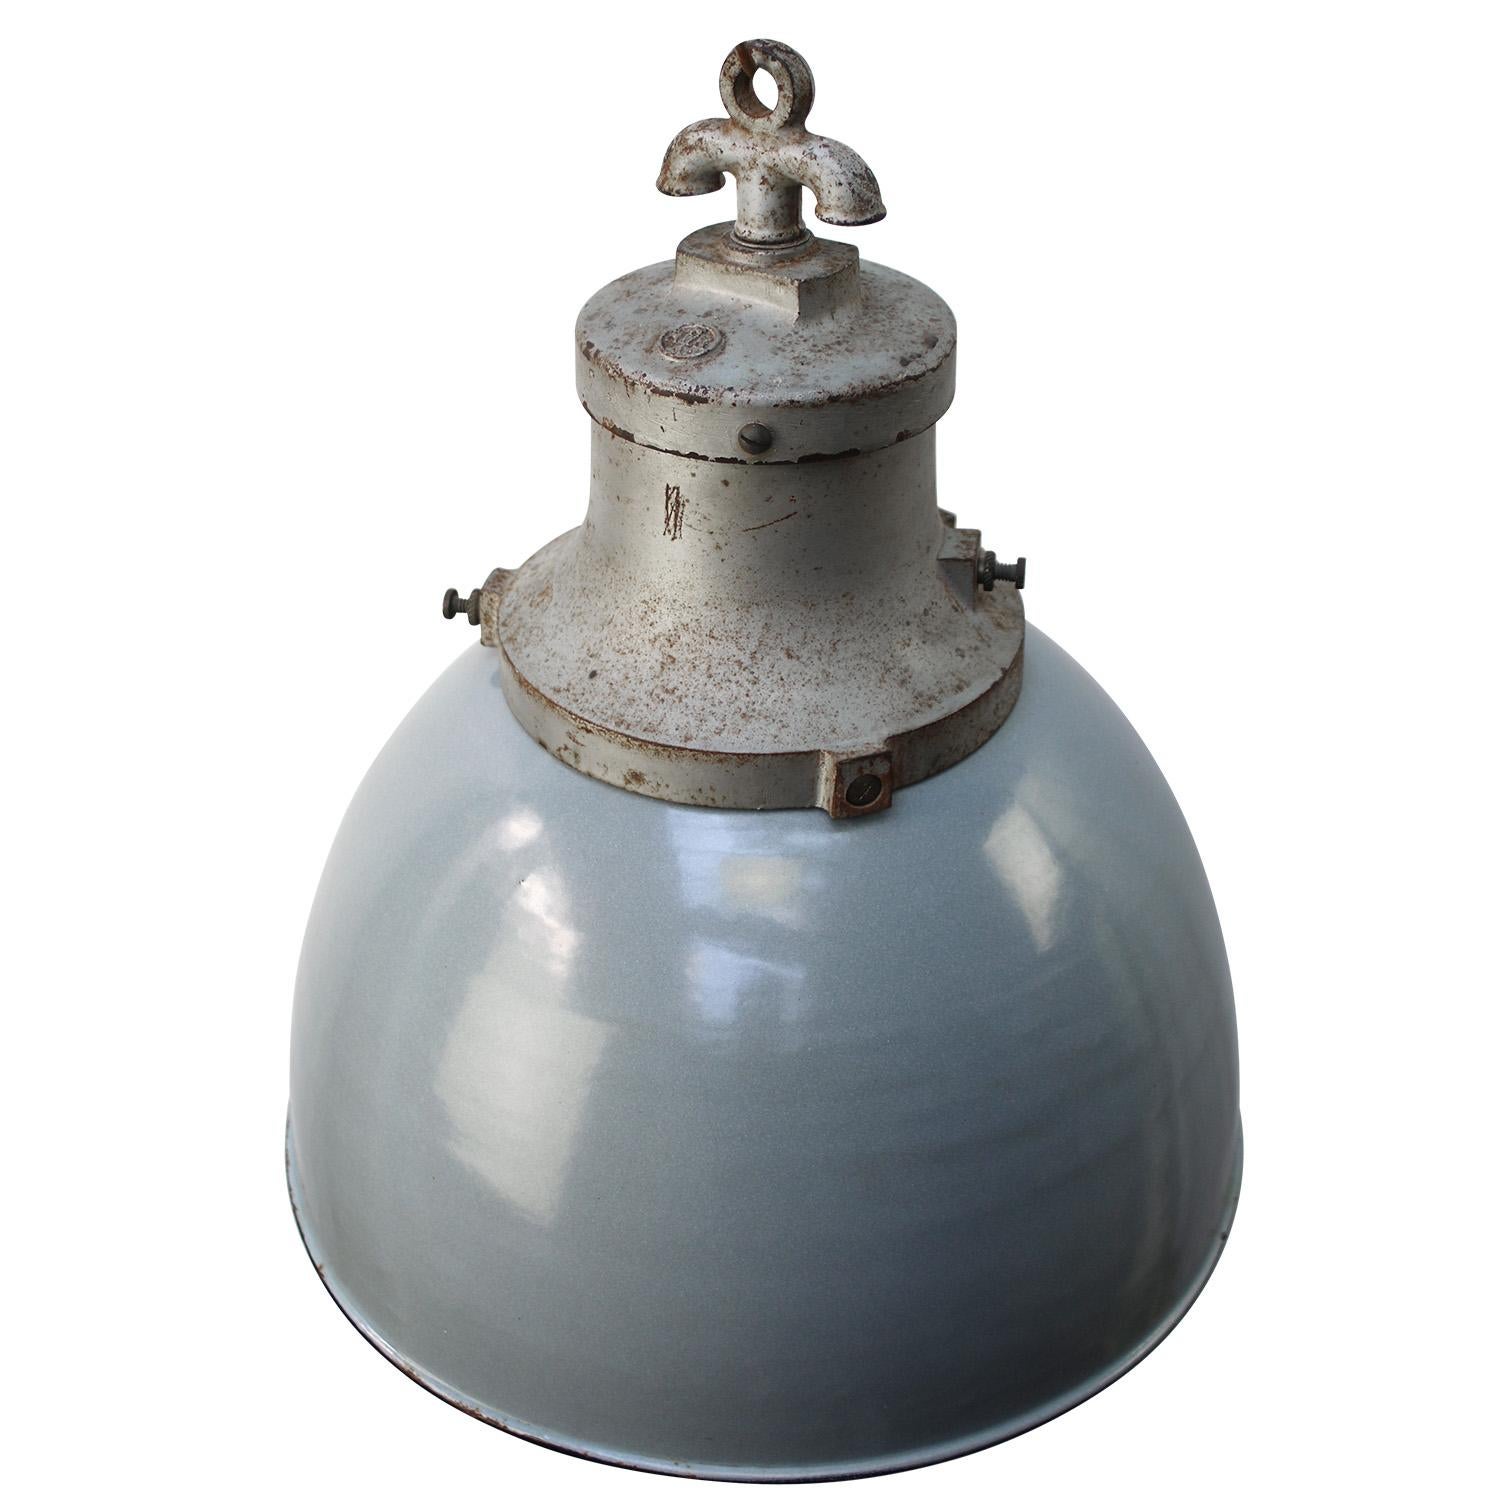 Rare and old factory lamp by HWK
Grey enamel with grey cast iron top
White interior

Weight: 5.40 kg / 11.9 lb

Priced per individual item. All lamps have been made suitable by international standards for incandescent light bulbs, energy-efficient